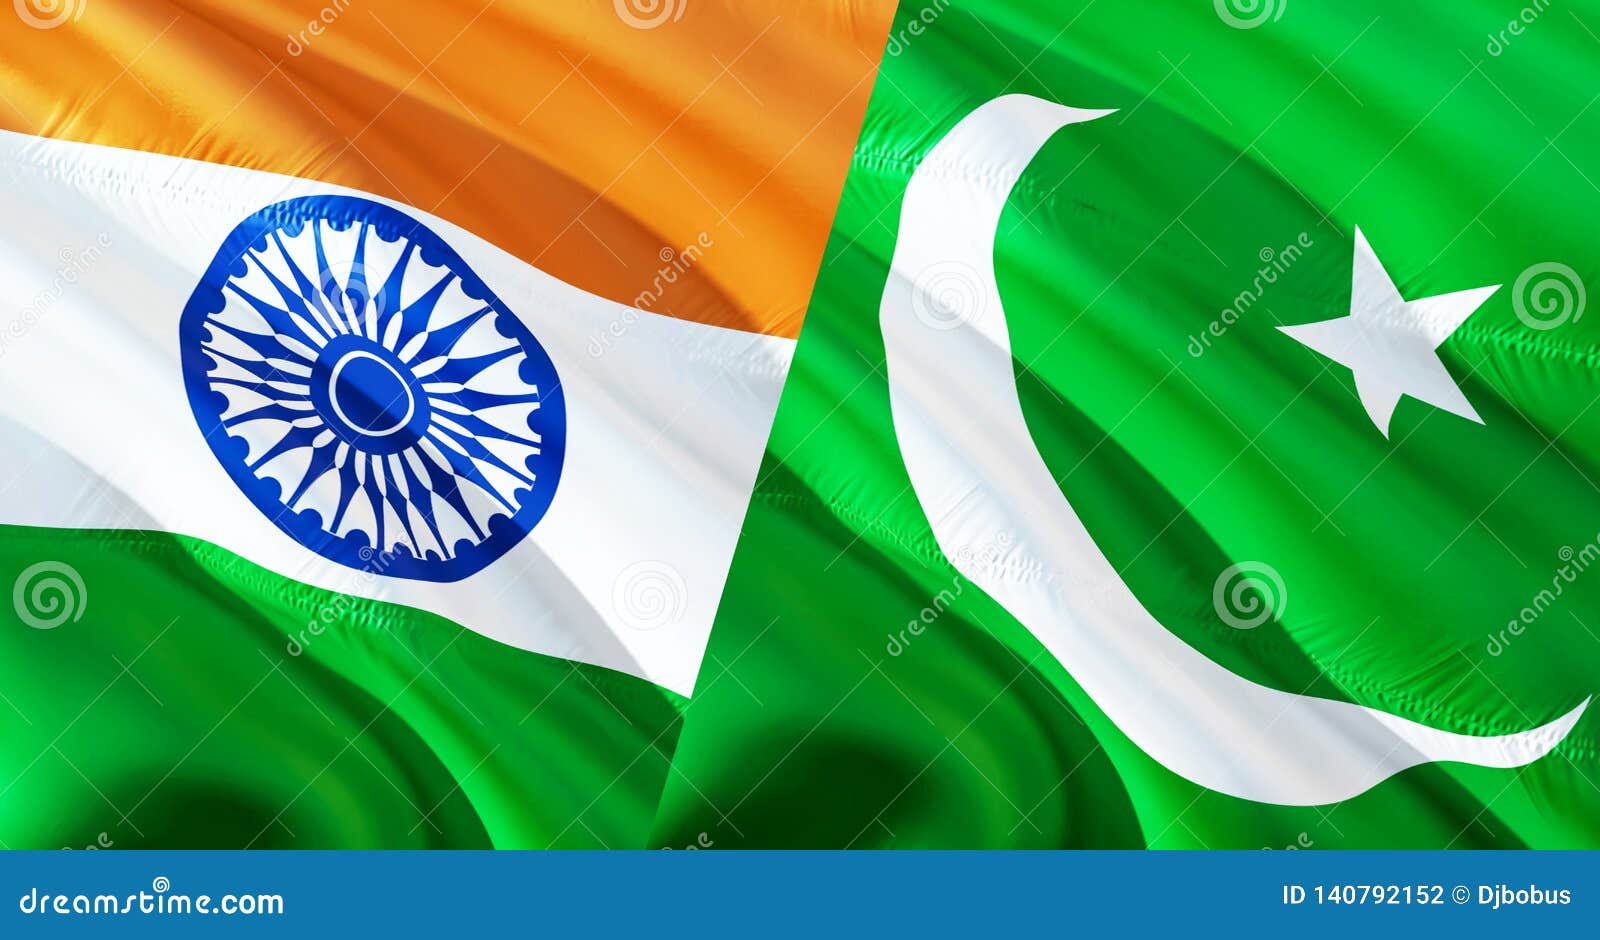 Pakistan and India Flags. Waving Flag Design,3D Rendering. Pakistan India  Flag Picture, Wallpaper Image Stock Photo - Image of design, delhi:  140792152